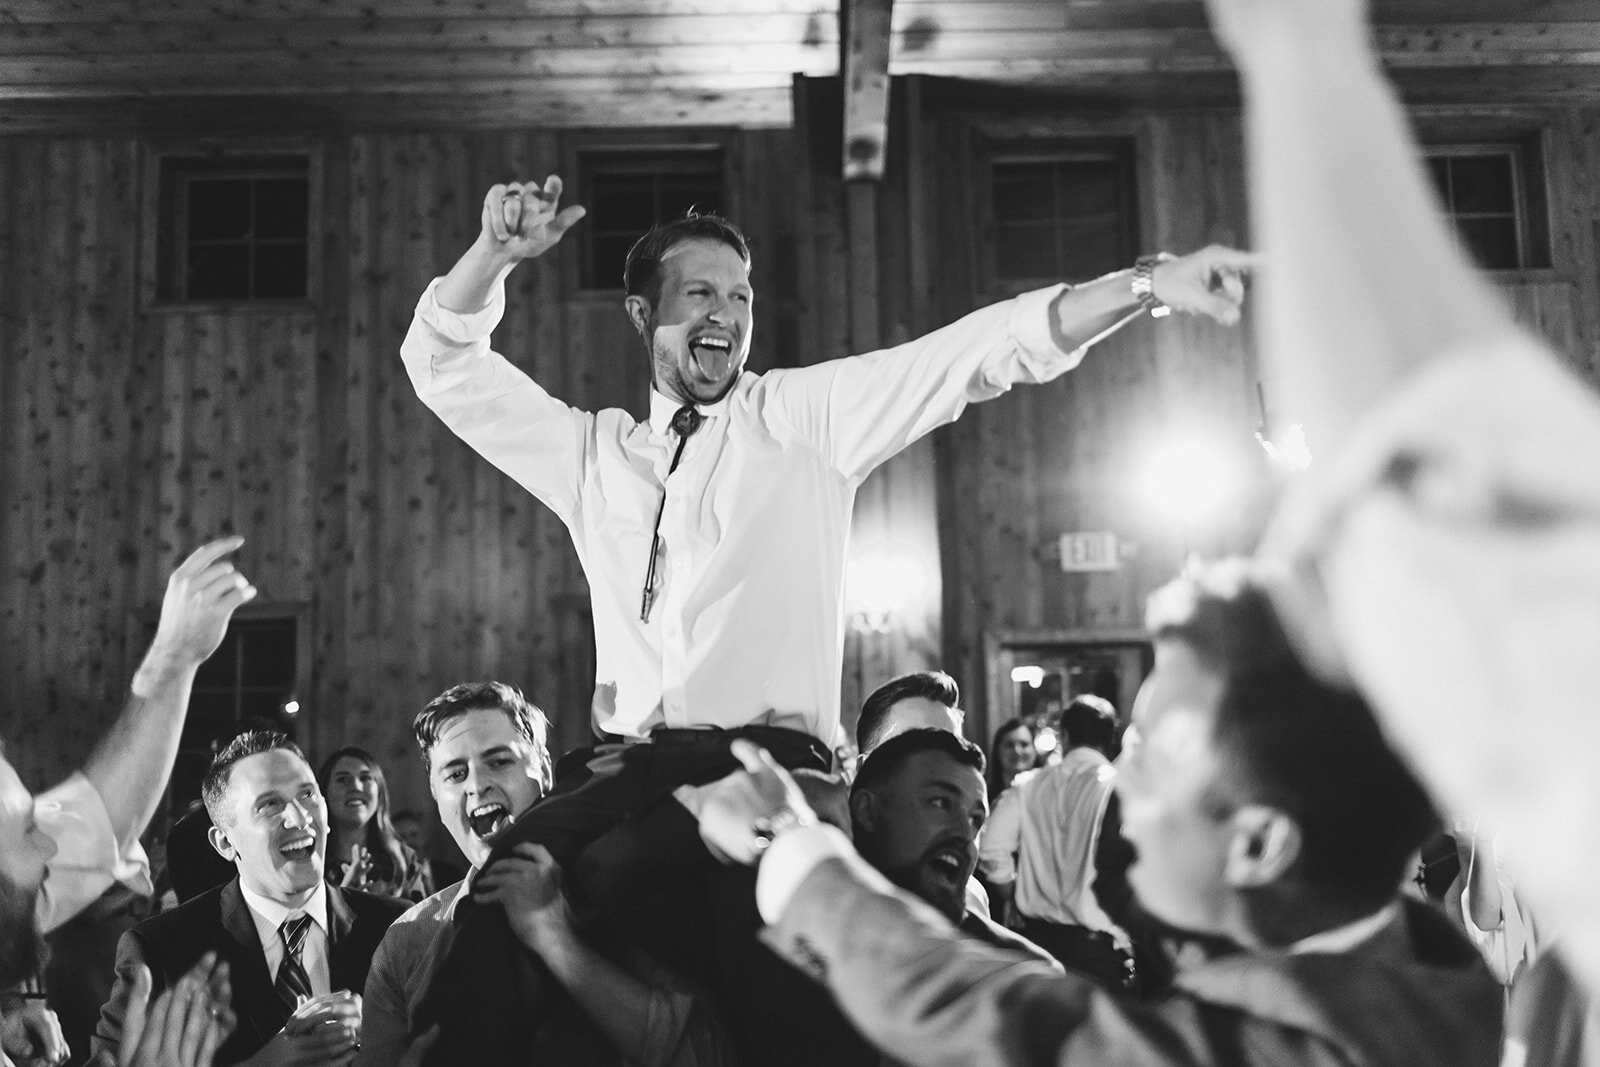  groom having a good time at the wedding 